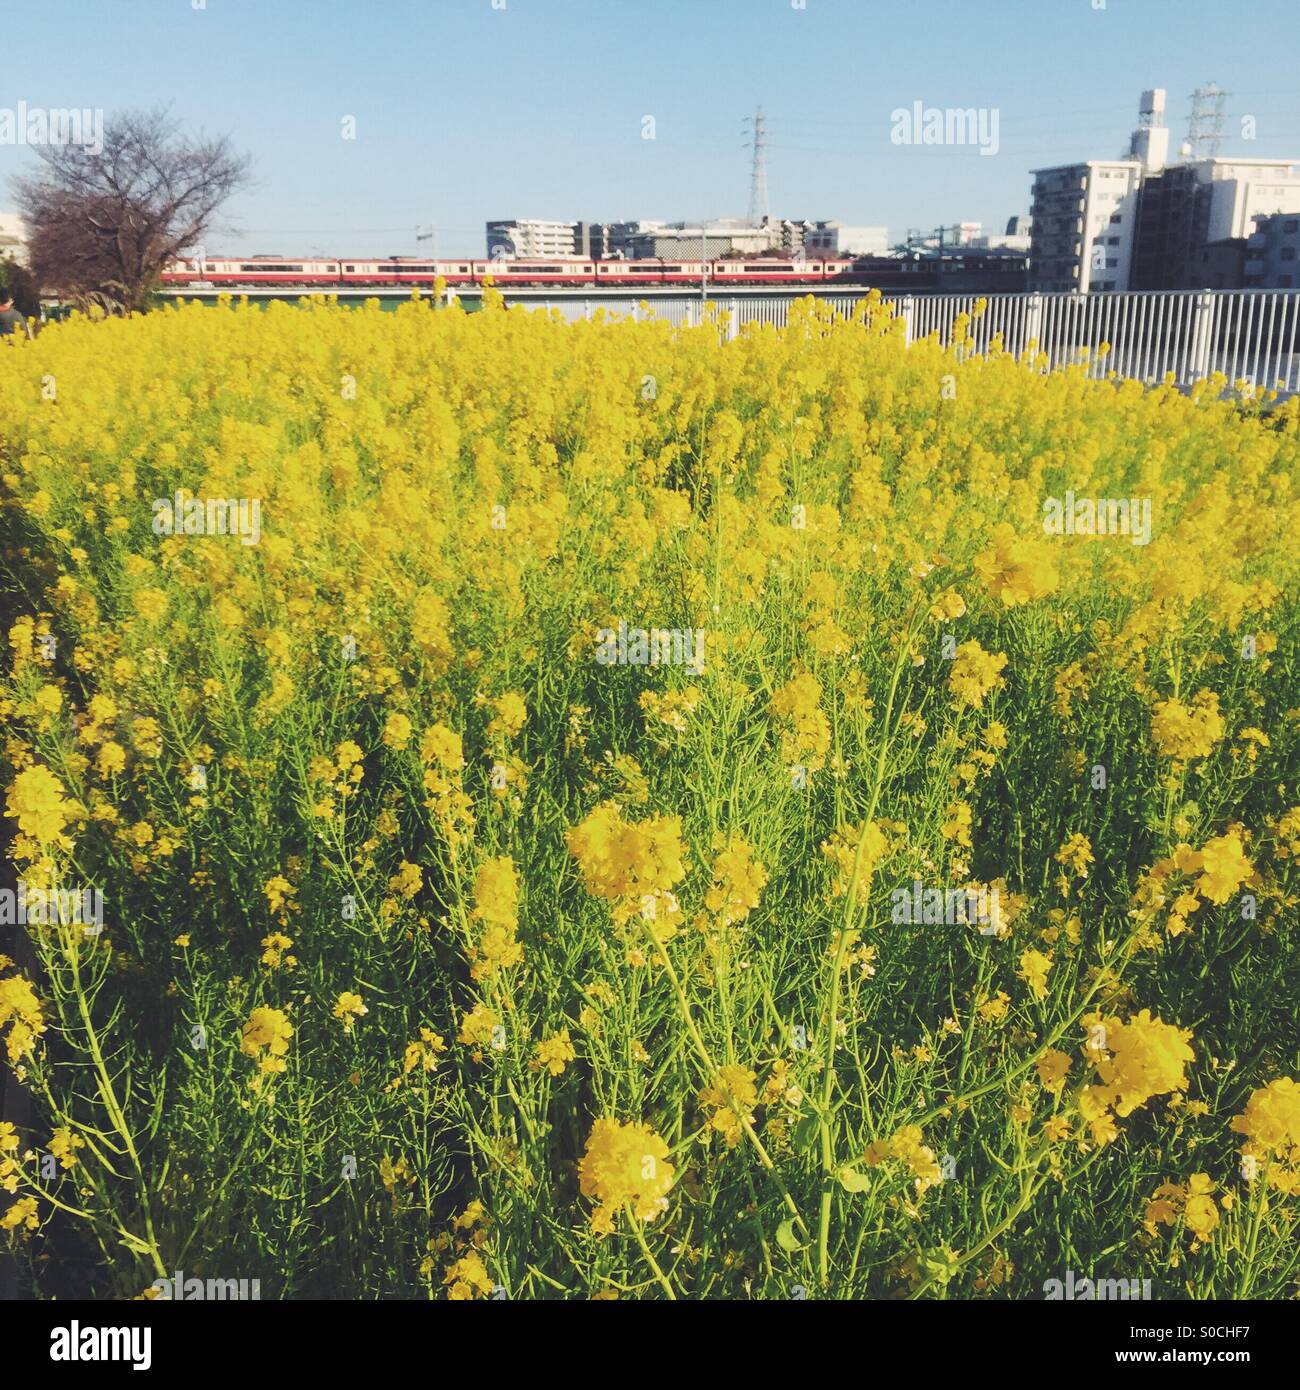 Vibrant yellow field mustard on foreground with red Keikyu train and blue sky in background, taken at Tsurumi Ward in Yokohama City, Japan. Stock Photo